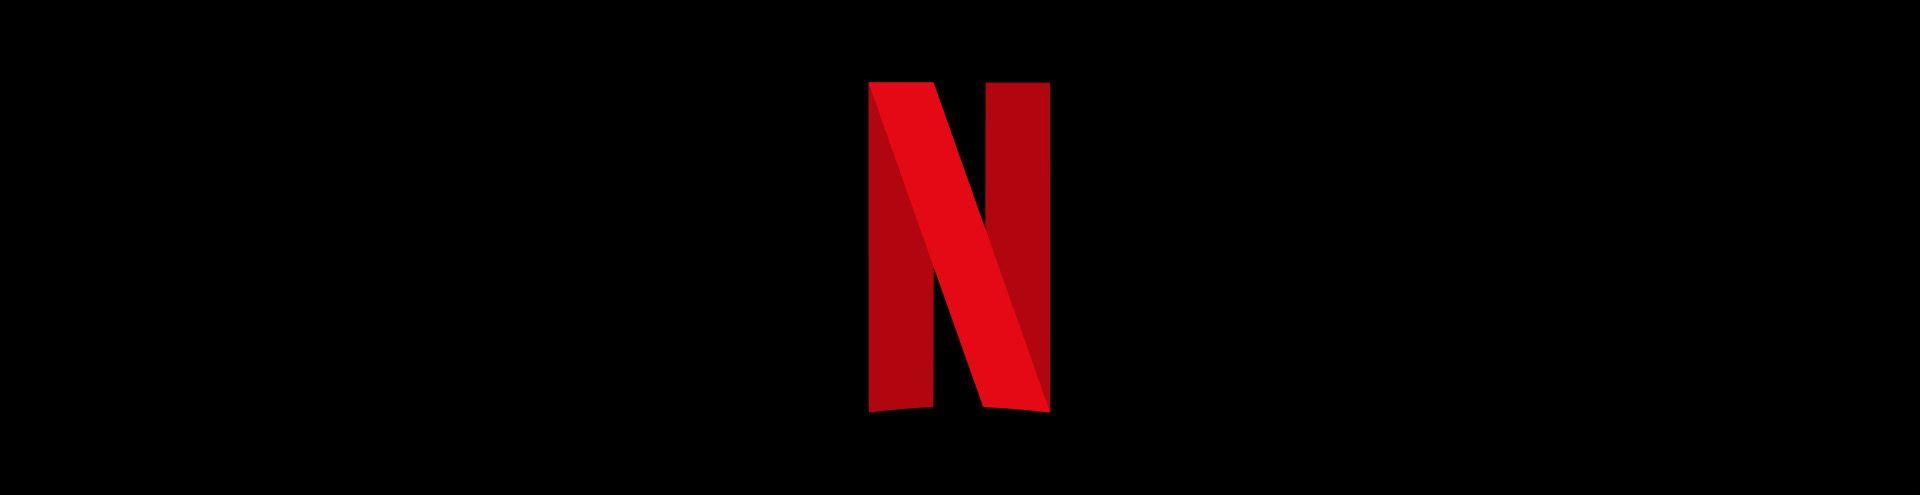 What You Need to Know to Start a Streaming Service Like Netflix